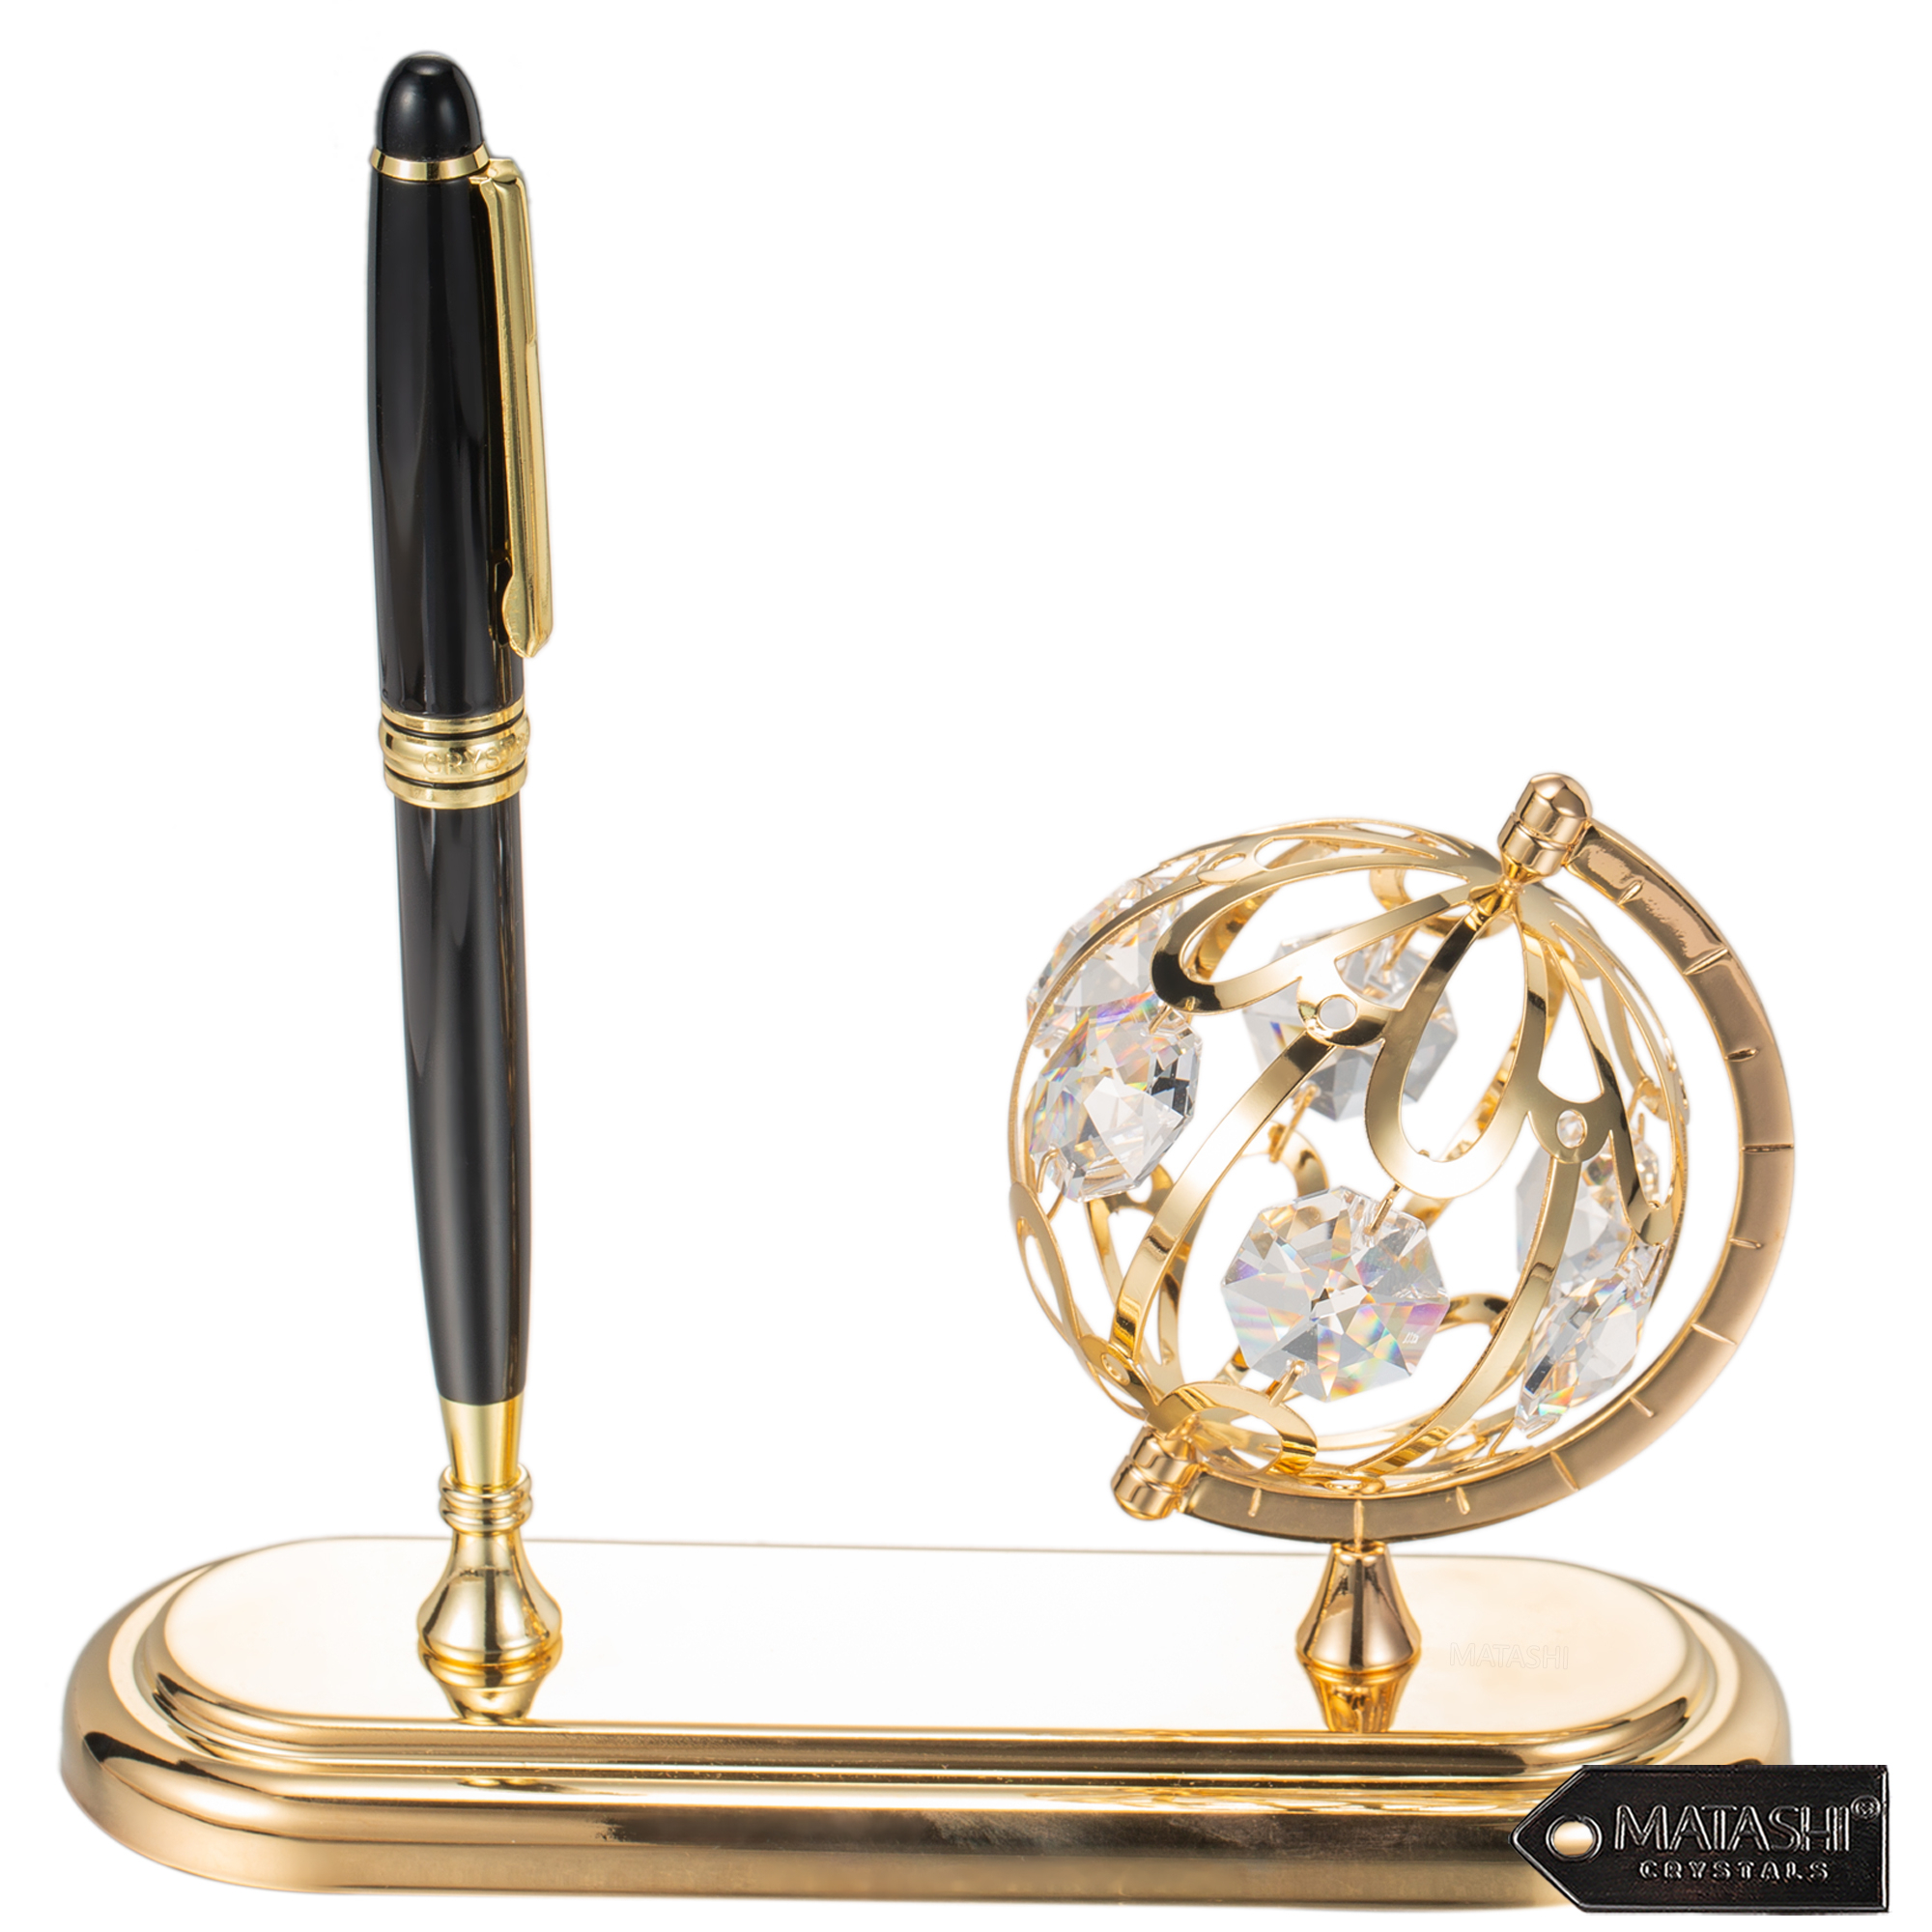 Matashi Highly Polished 24K Gold Plated Executive Desk Set With Pen And Globe Ornament